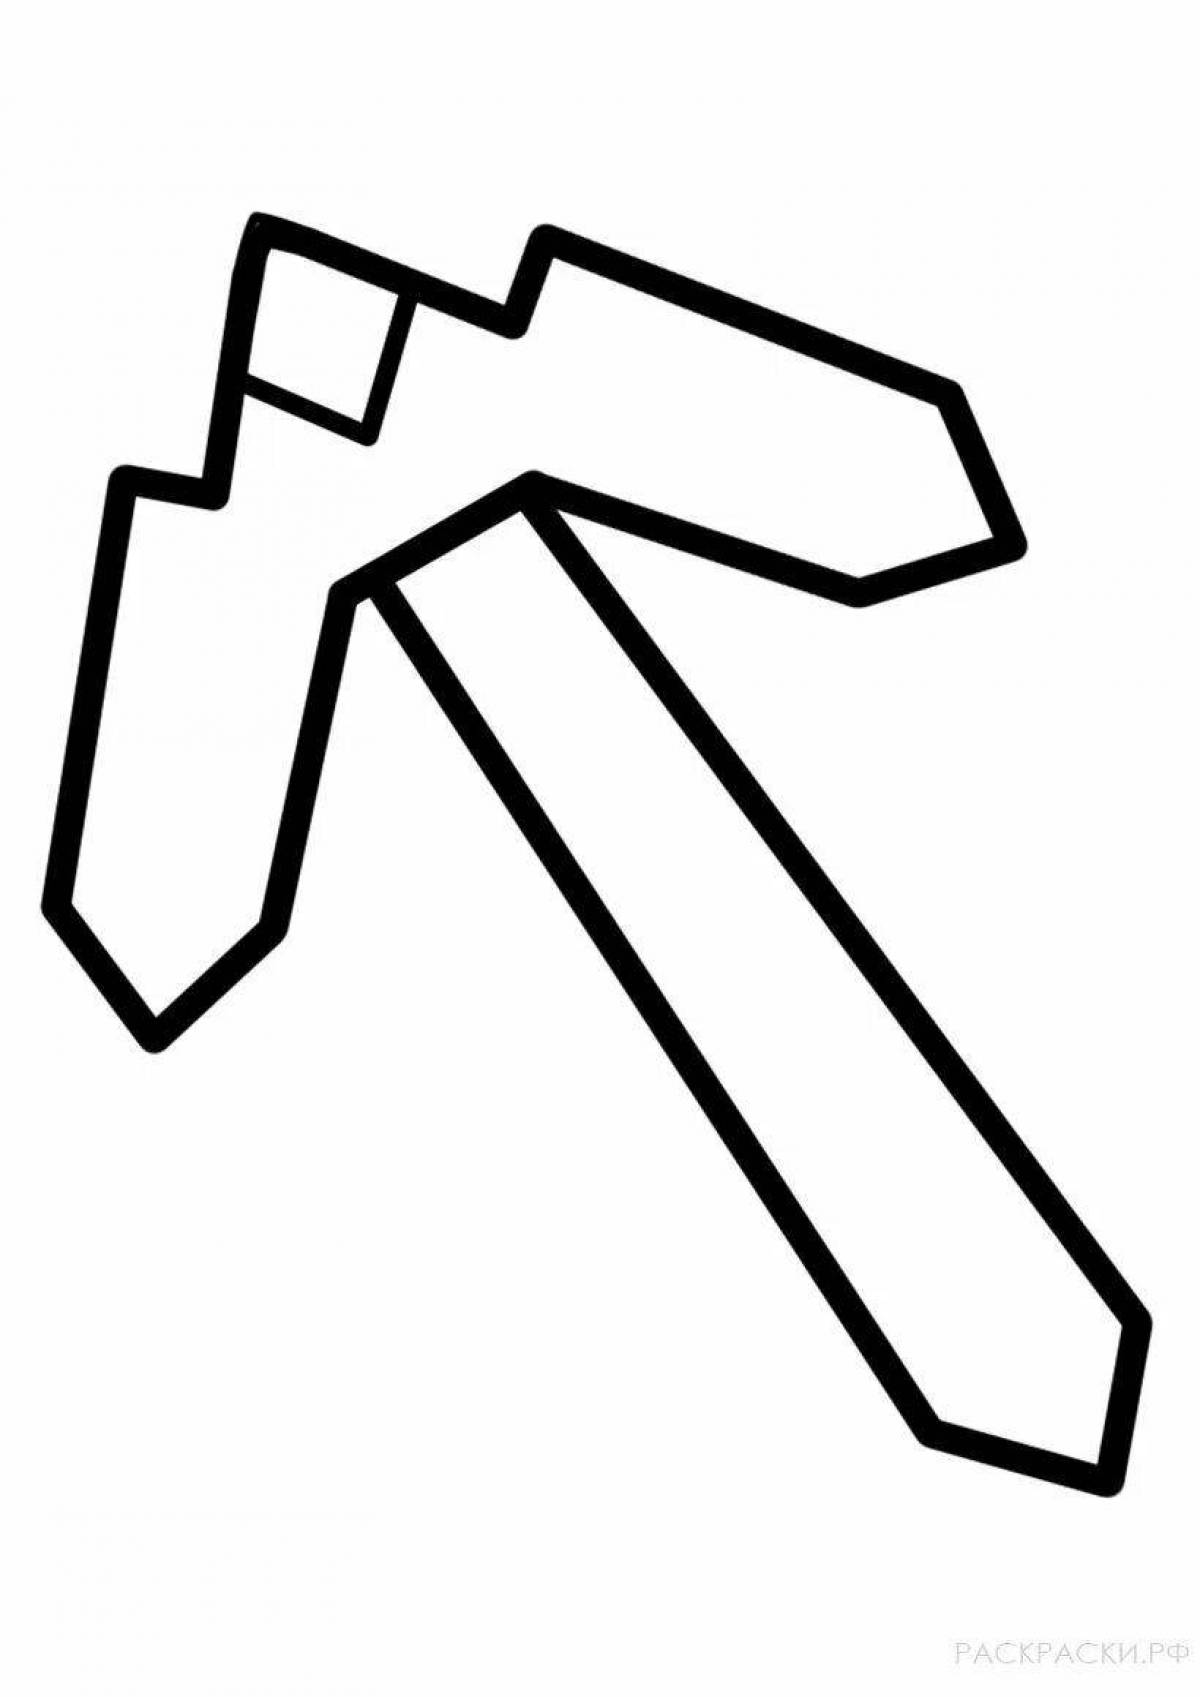 Attractive minecraft pickaxe coloring page